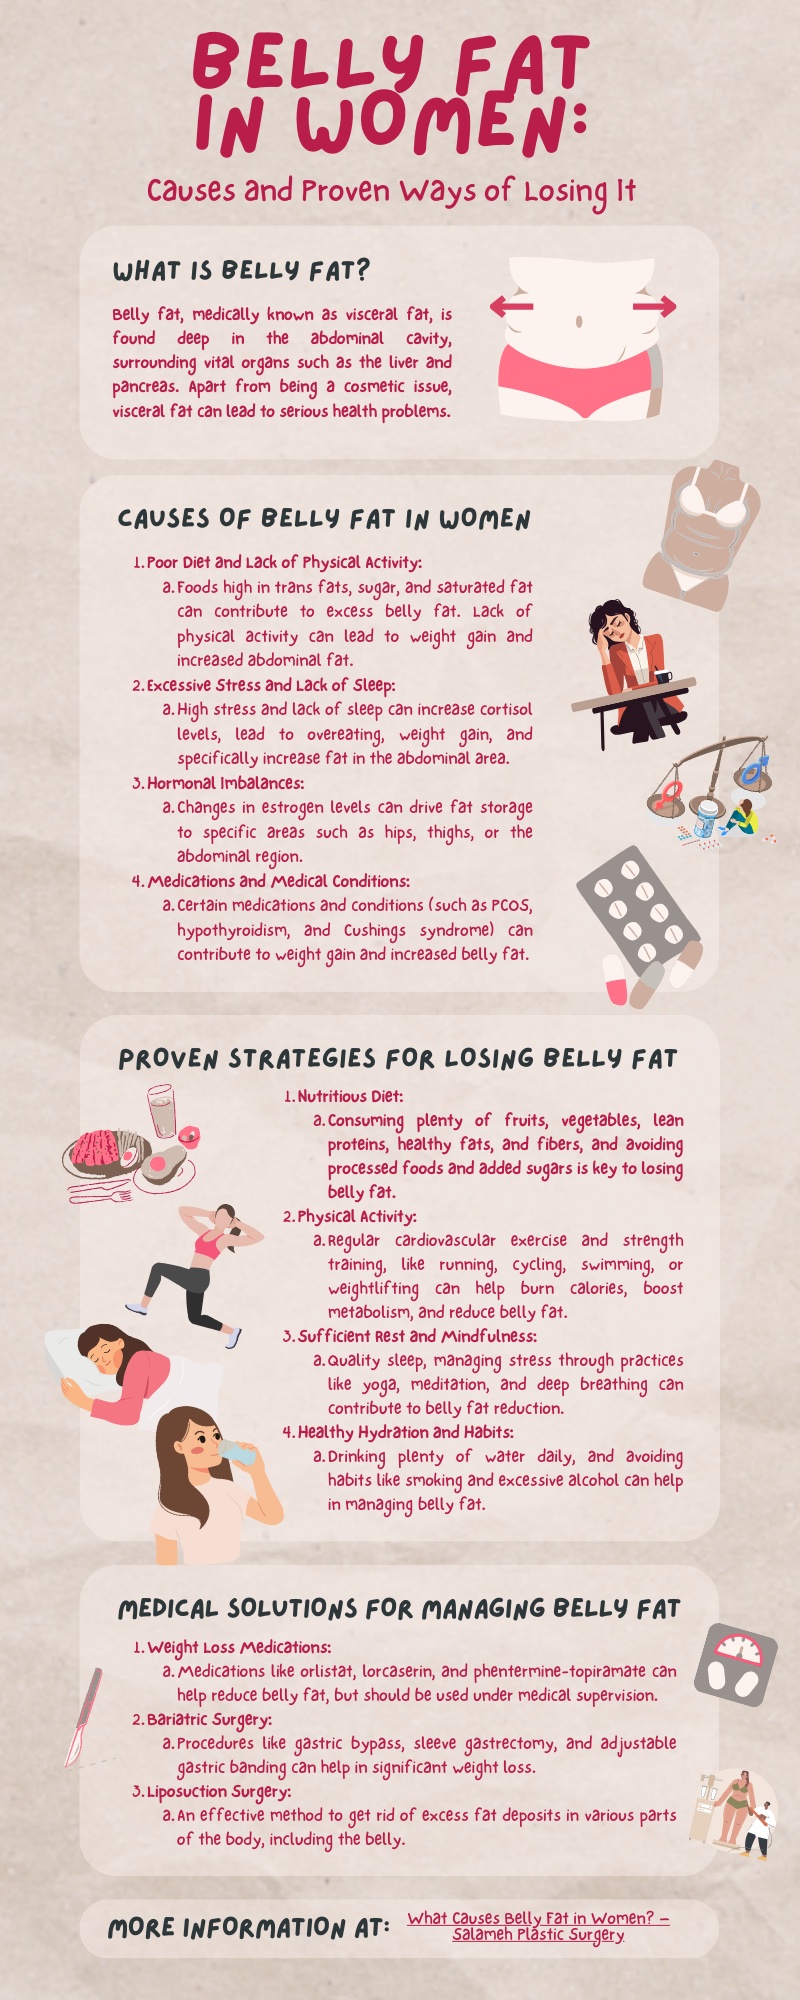 Infographic about what is belly fat and the causes of belly fat in women as well as the solutions to reducing it.